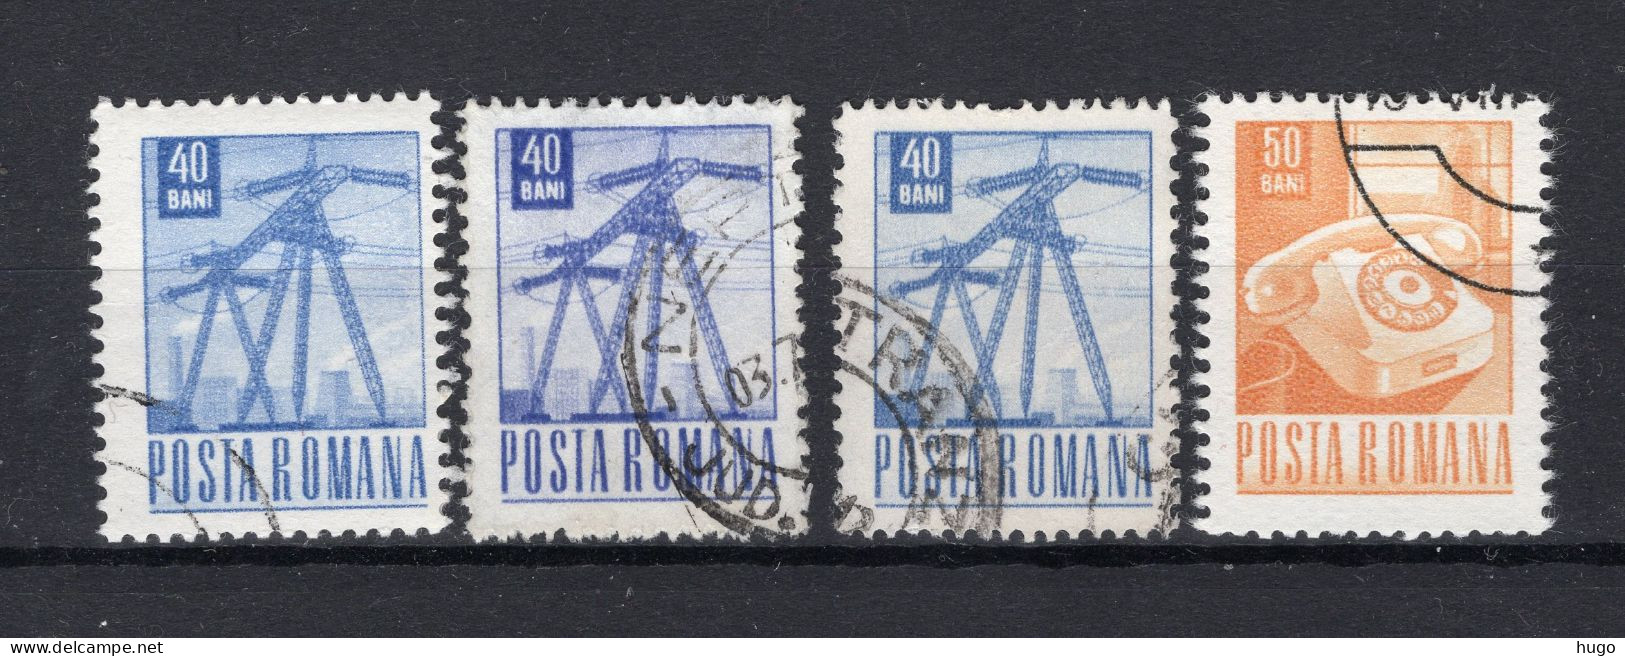 ROEMENIE Yt. 2349A/2350° Gestempeld 1967-1968 - Used Stamps